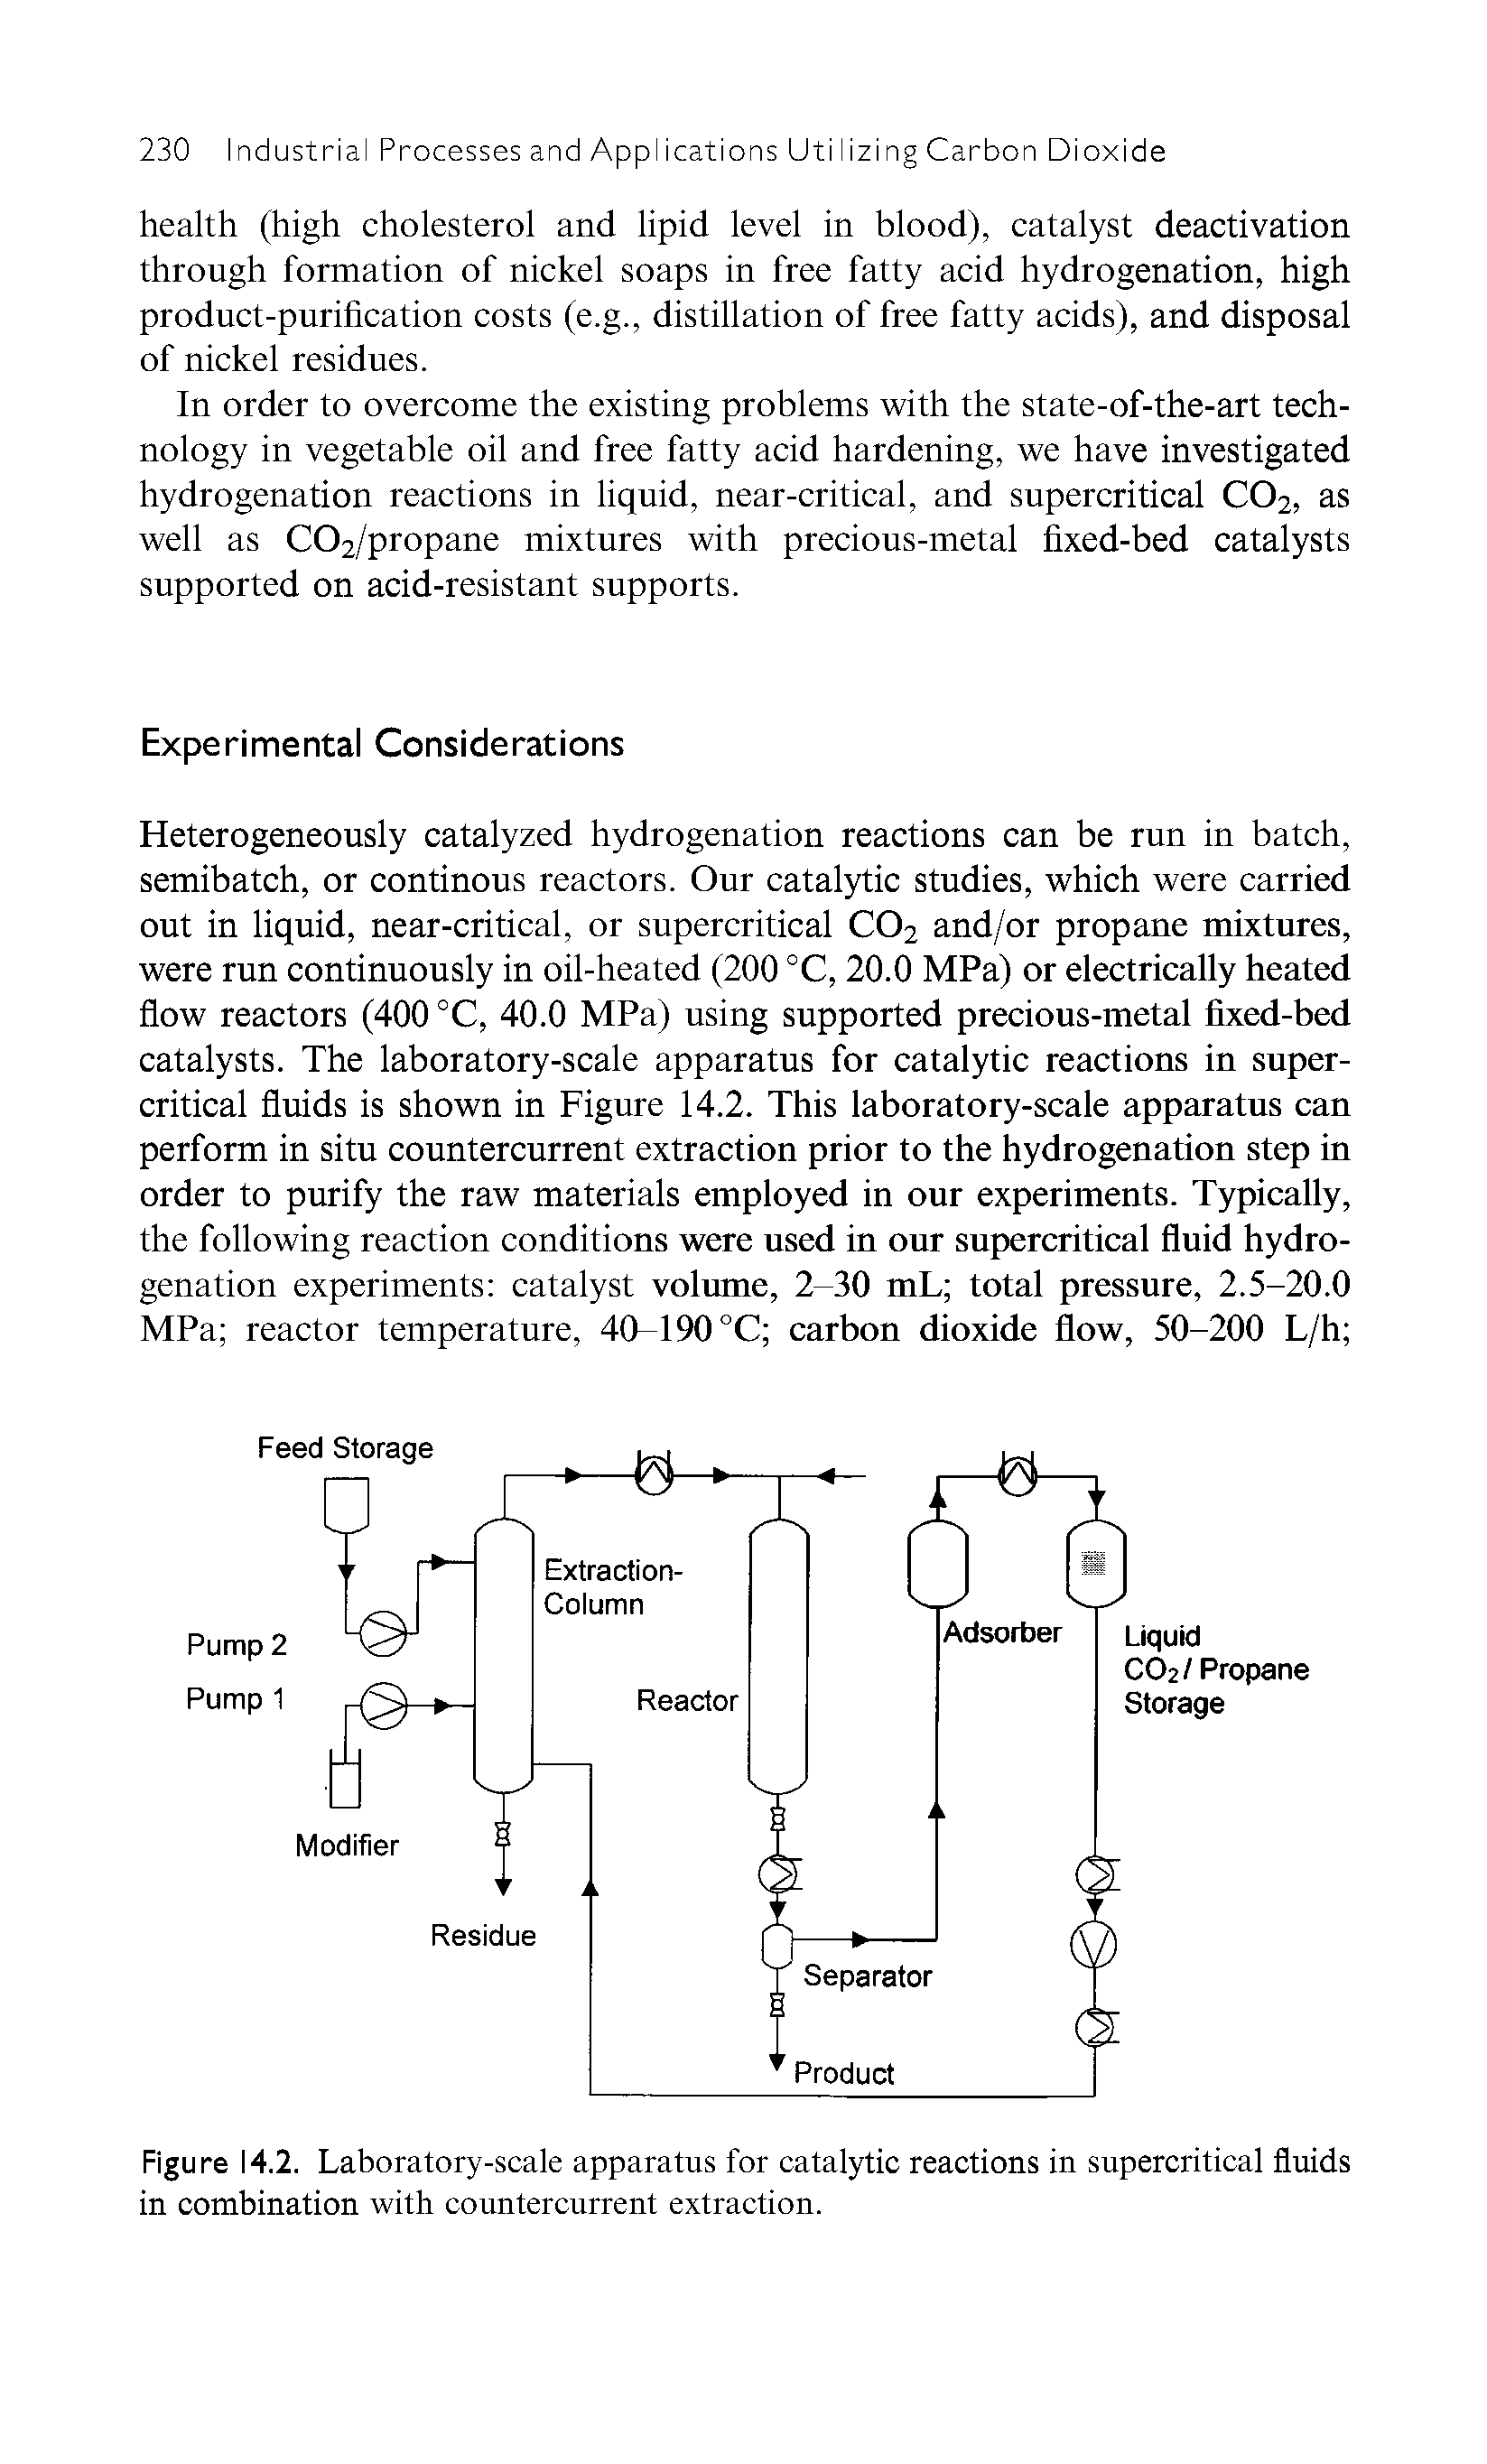 Figure 14.2. Laboratory-scale apparatus for catalytic reactions in supercritical fluids in combination with countercurrent extraction.